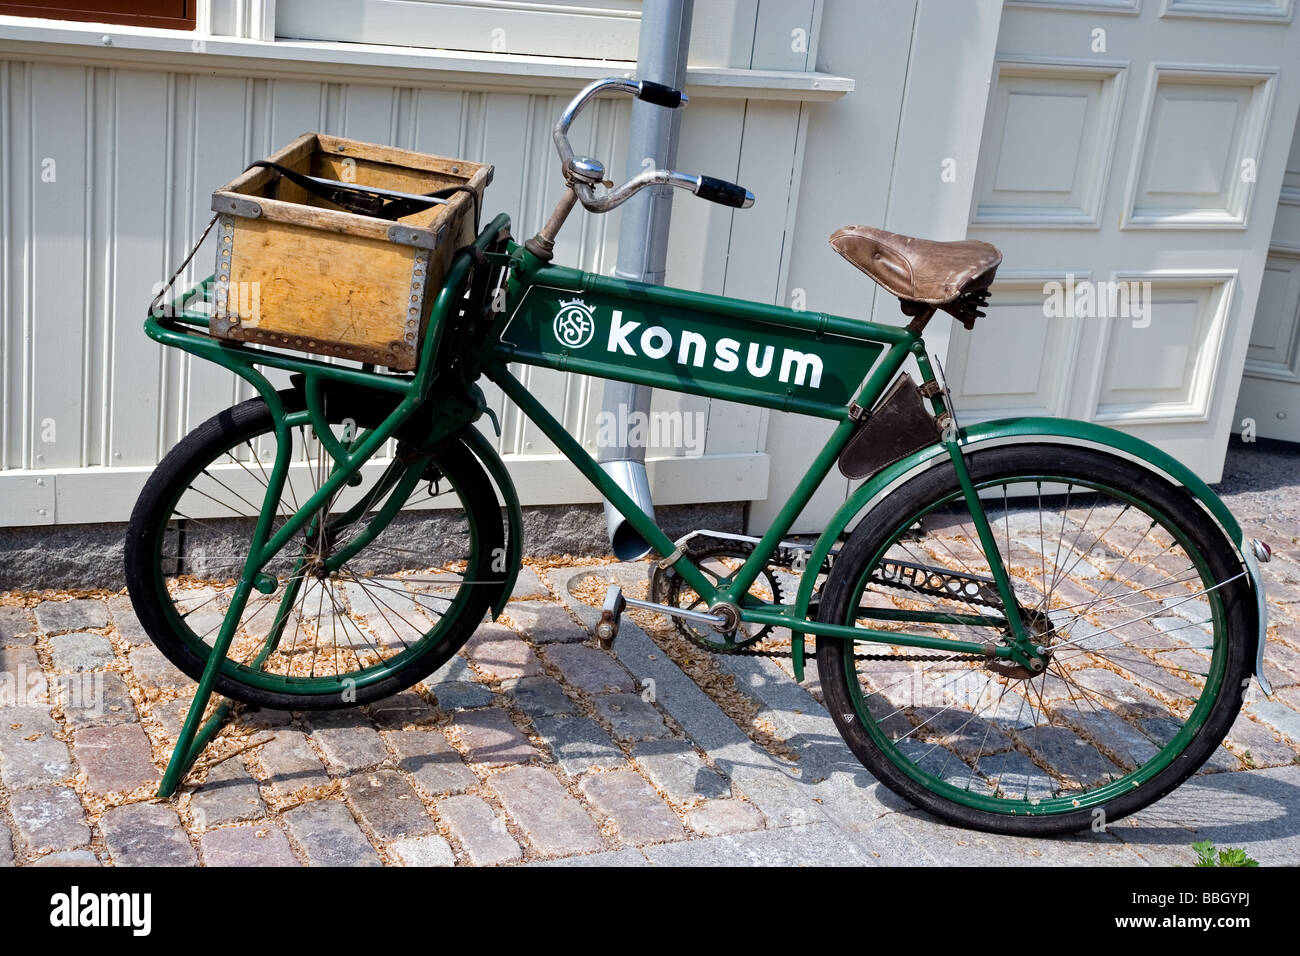 Delivery bicycle (Konsum) Stock Photo